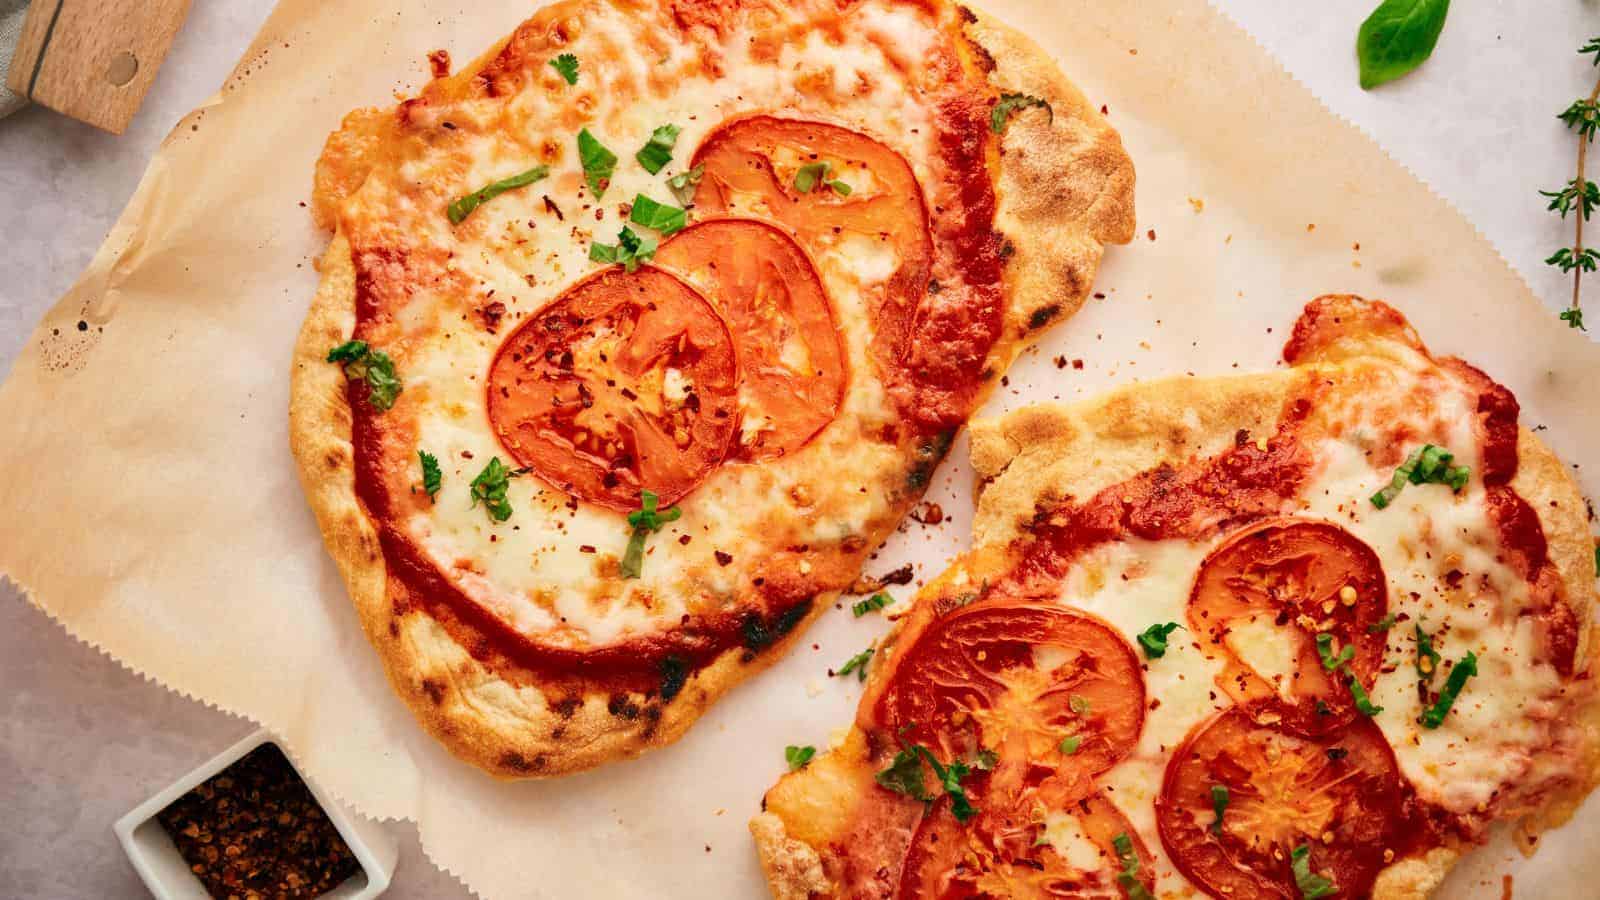 <p>Introducing our Kid-Friendly Flatbread    Pizza   Recipe – a fun and delicious twist on a classic favorite that’s sure to be a hit with kids of all ages! Made with soft and chewy flatbread as the base, and topped with flavorful tomato sauce, melted cheese, and their favorite toppings, this    pizza   is a delightful treat that kids will love.<br><strong>Get the Recipe: </strong><a href="https://www.splashoftaste.com/flatbread-pizza/?utm_source=msn&utm_medium=page&utm_campaign=msn">Flatbread Pizza</a></p>